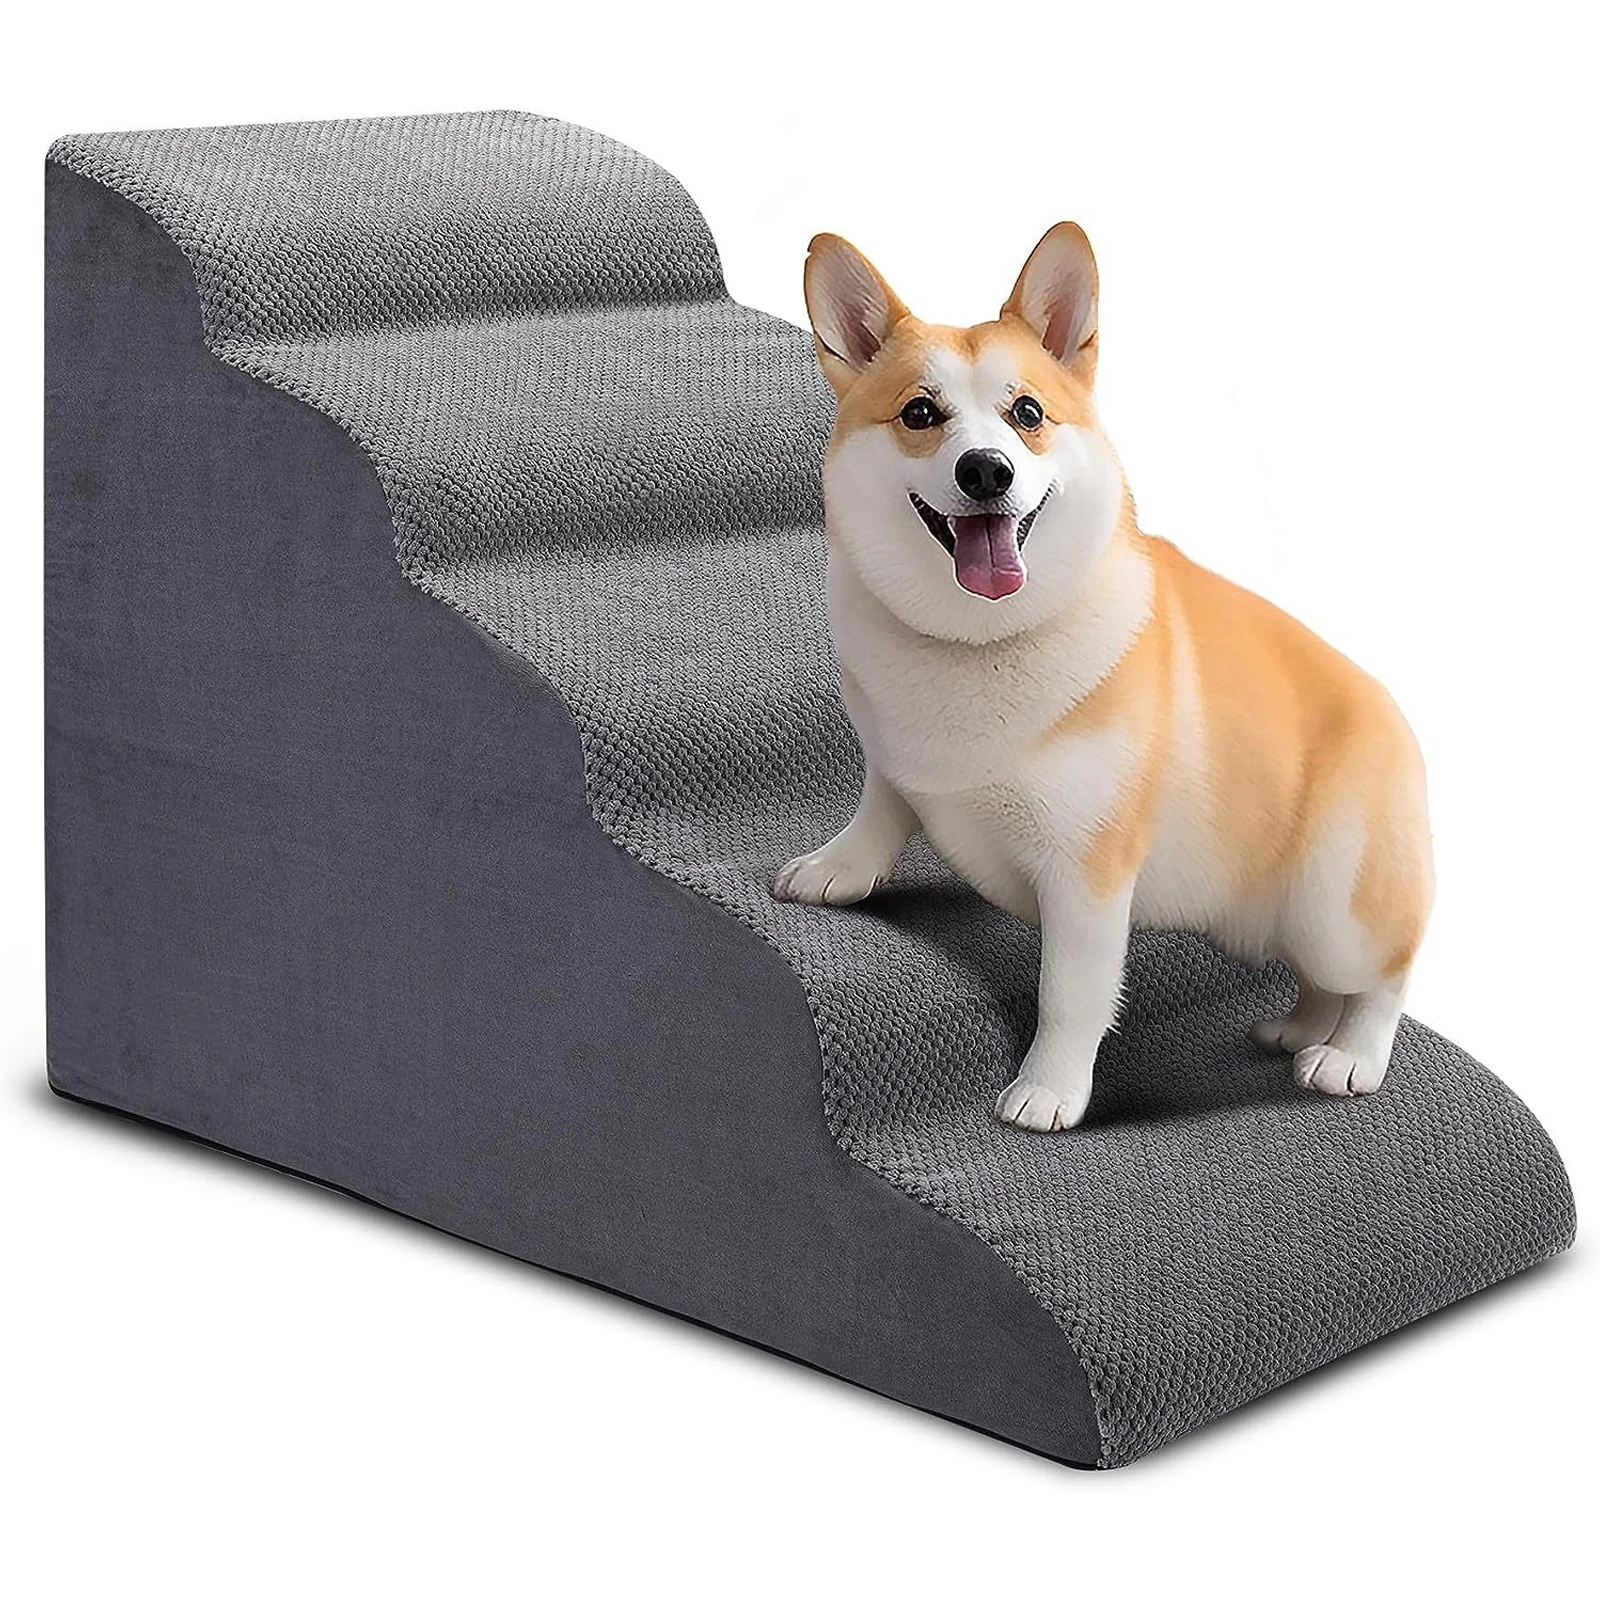 Dog Stairs for High Beds 5-Step Dog Steps for Small Dogs and Cats Pet Stairs Climbing Non-Slip Balanced Indoor Step